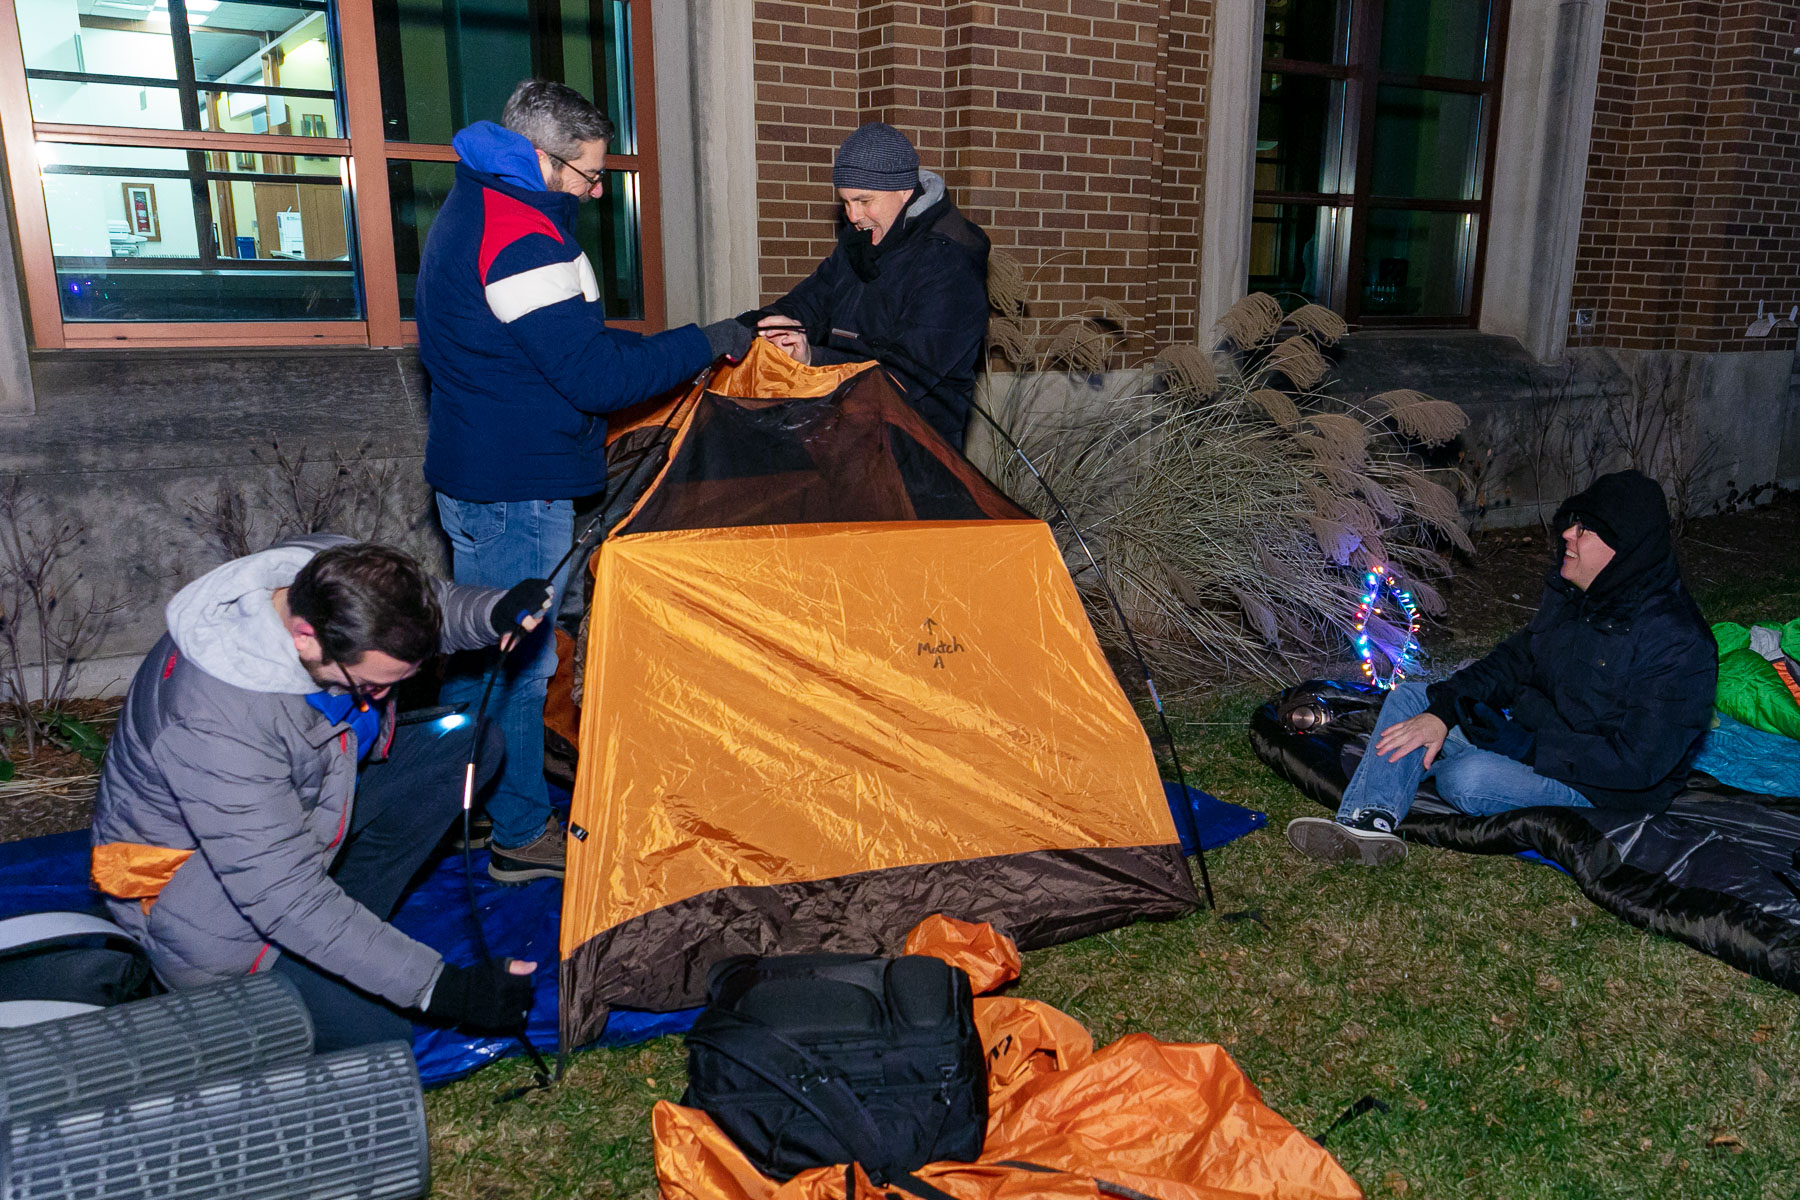 About 75 people braved the wind and cold to sleep outside overnight. Chicago’s wind chill factor made it feel like it was 23 degrees, coming in a close second to the chill in Kharkiv, Ukraine, which also held a sleep out that night. (DePaul University/Randall Spriggs)